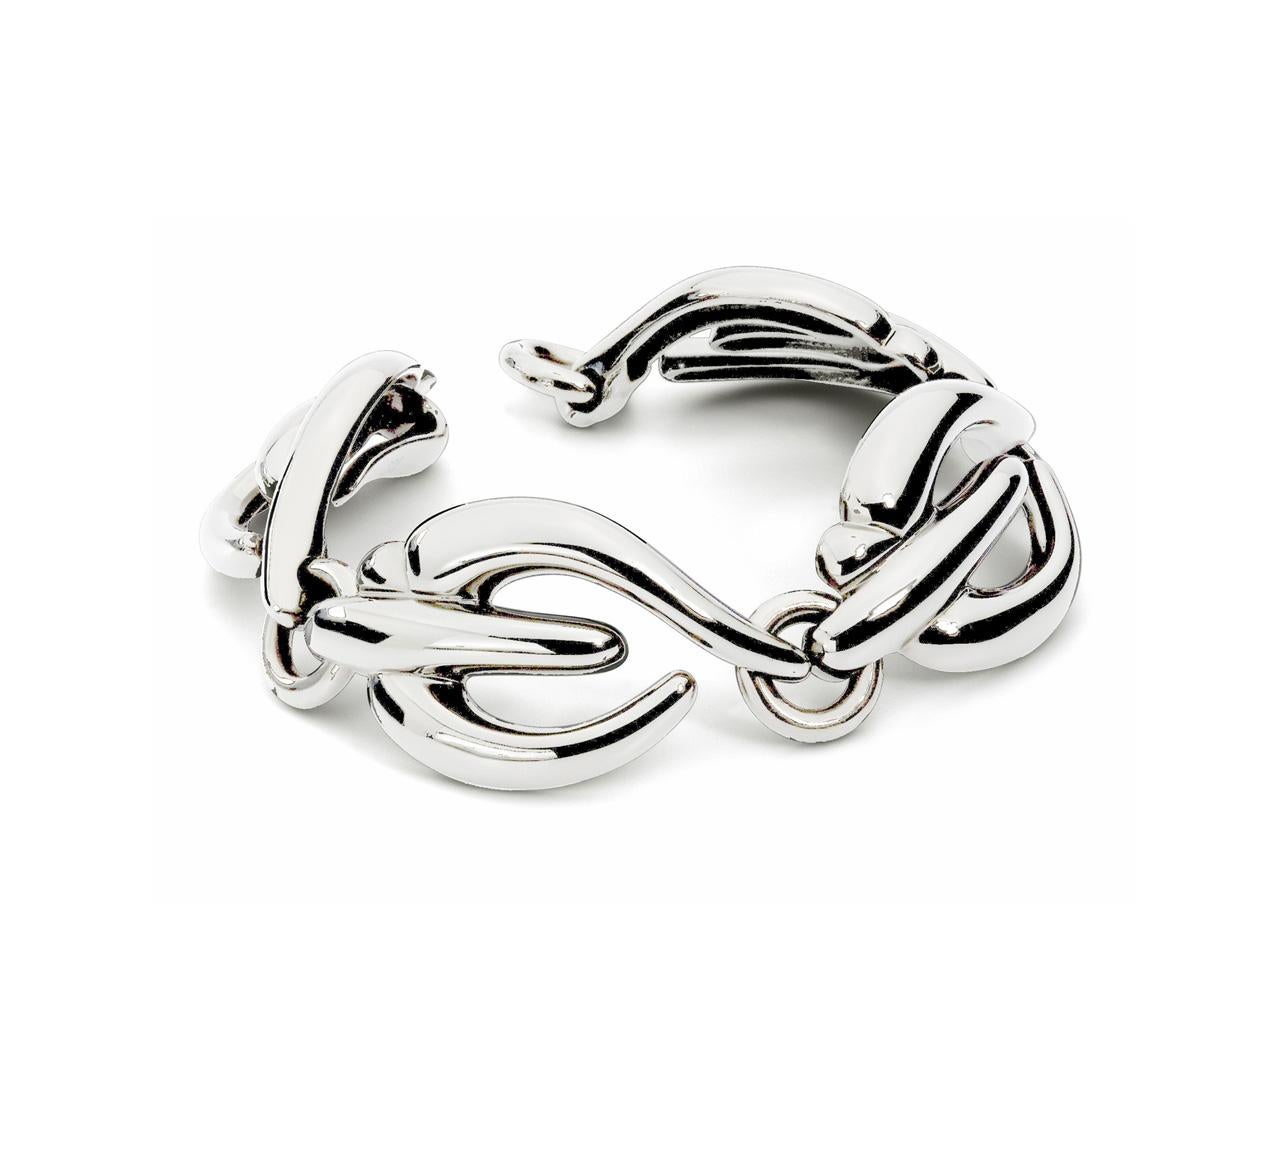 This very stylish bracelet is made out of 18 carat white gold.